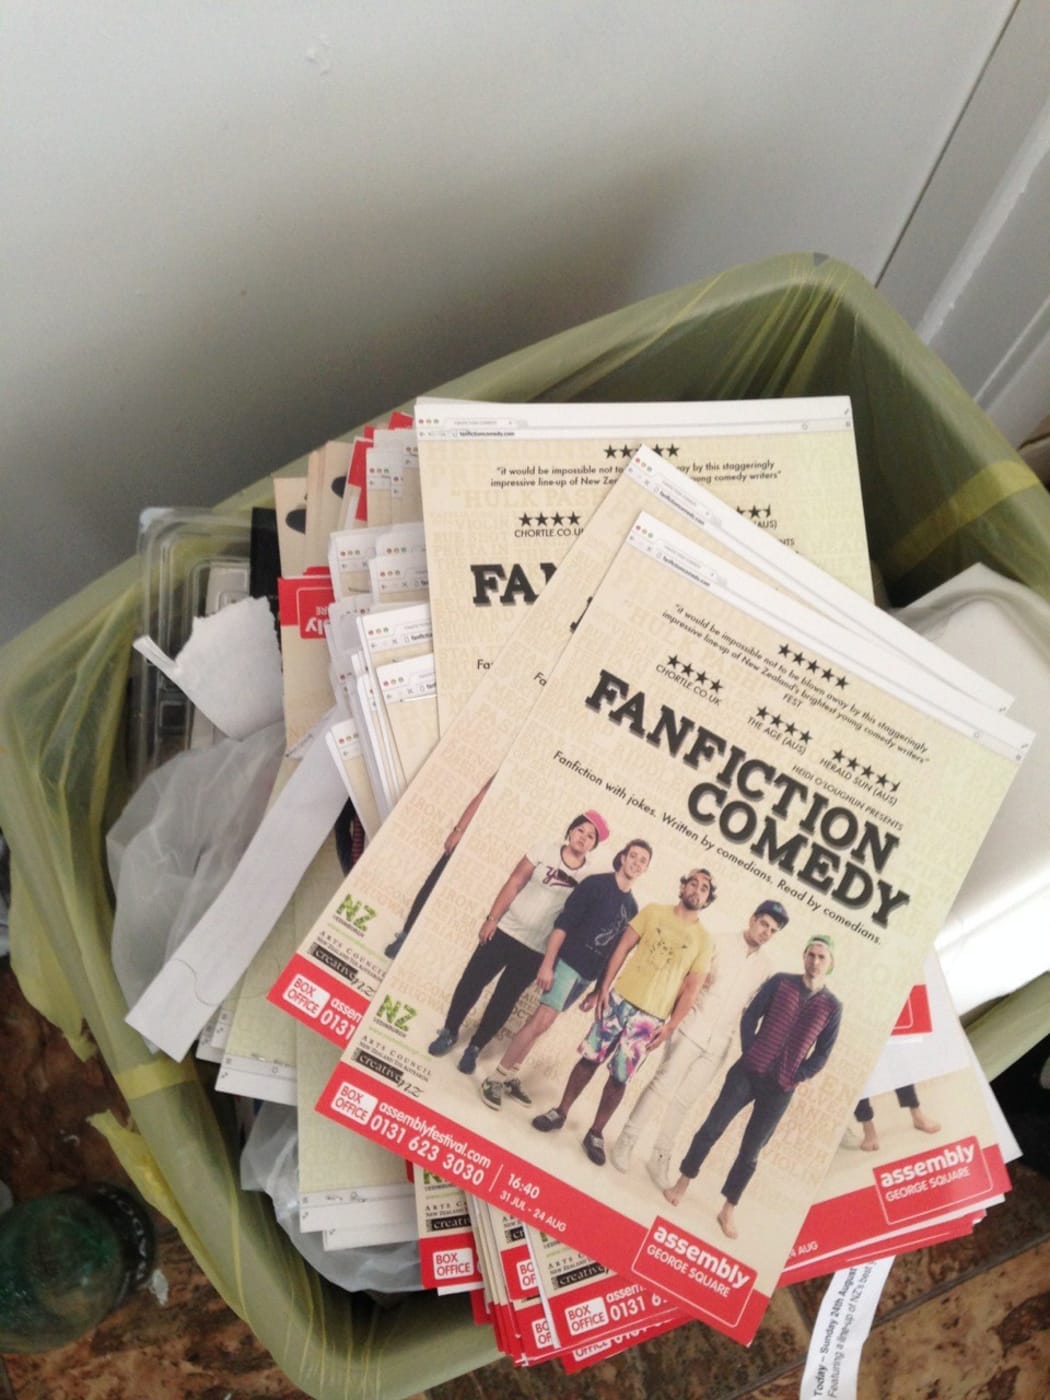 A picture of FanFiction Comedy flyers in a bin